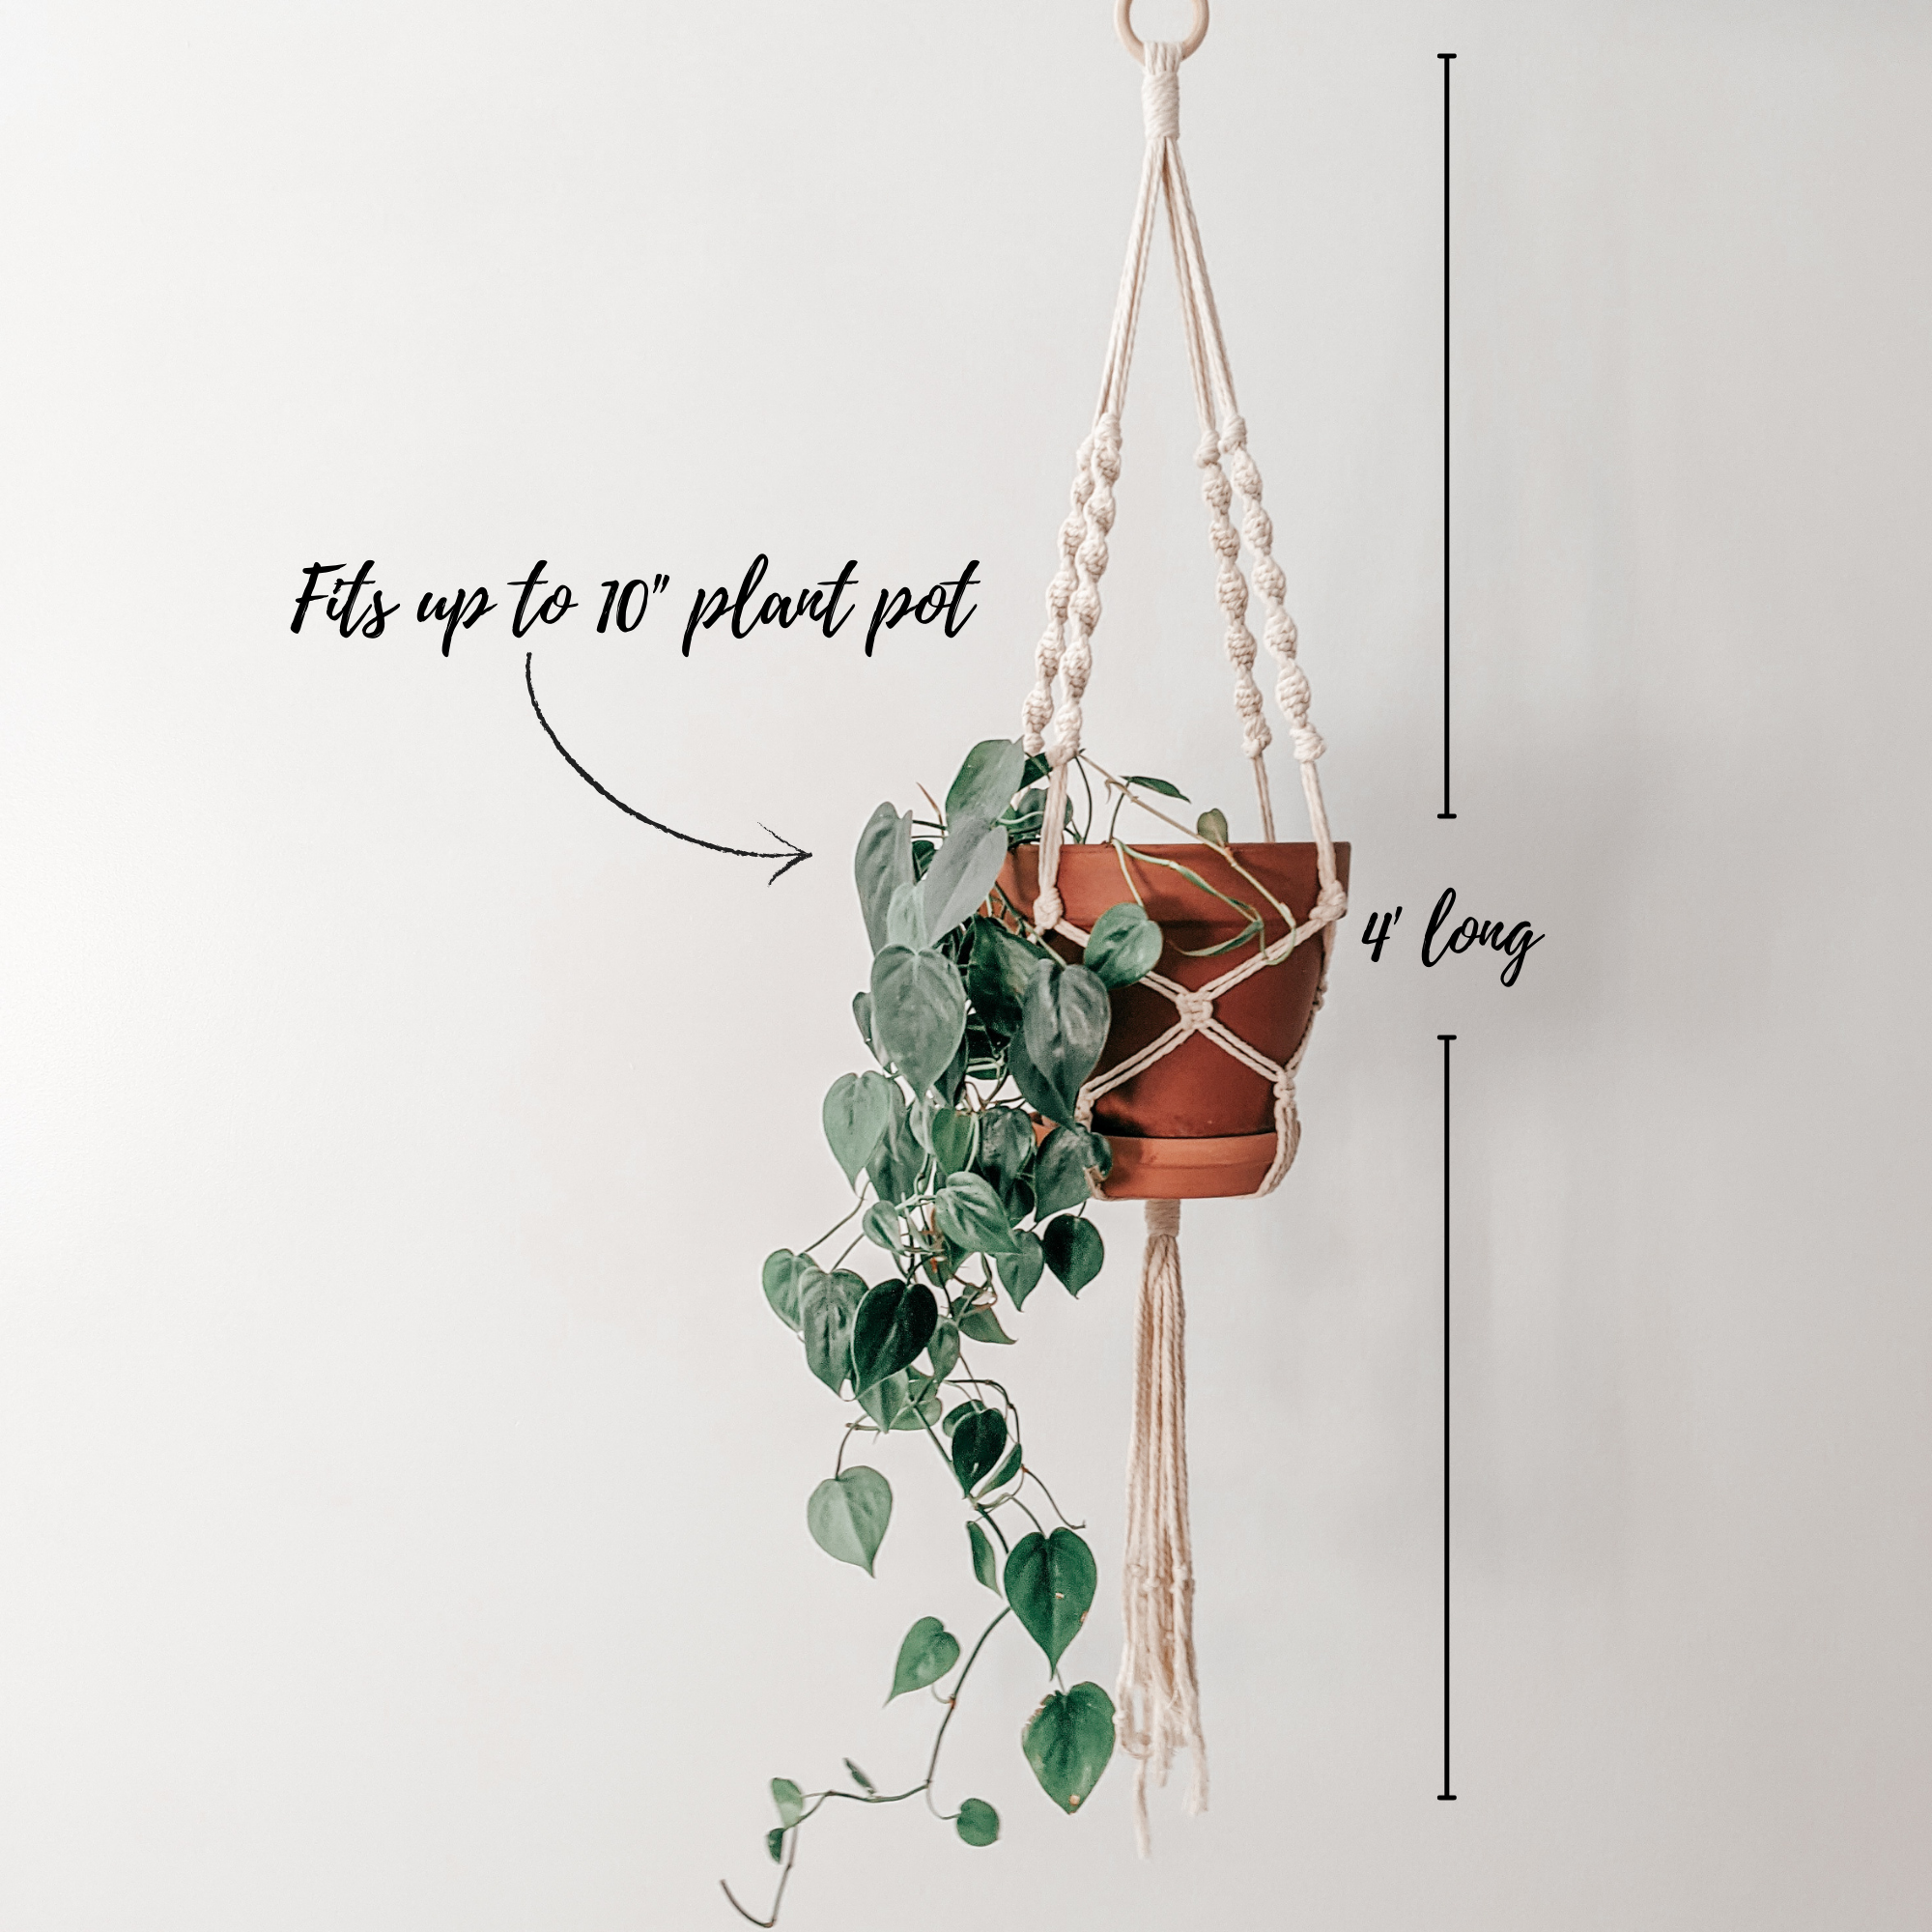 Boho Macrame DIY Plant Hanger Dimensions 4' in length fits plant pots up to 10" wide